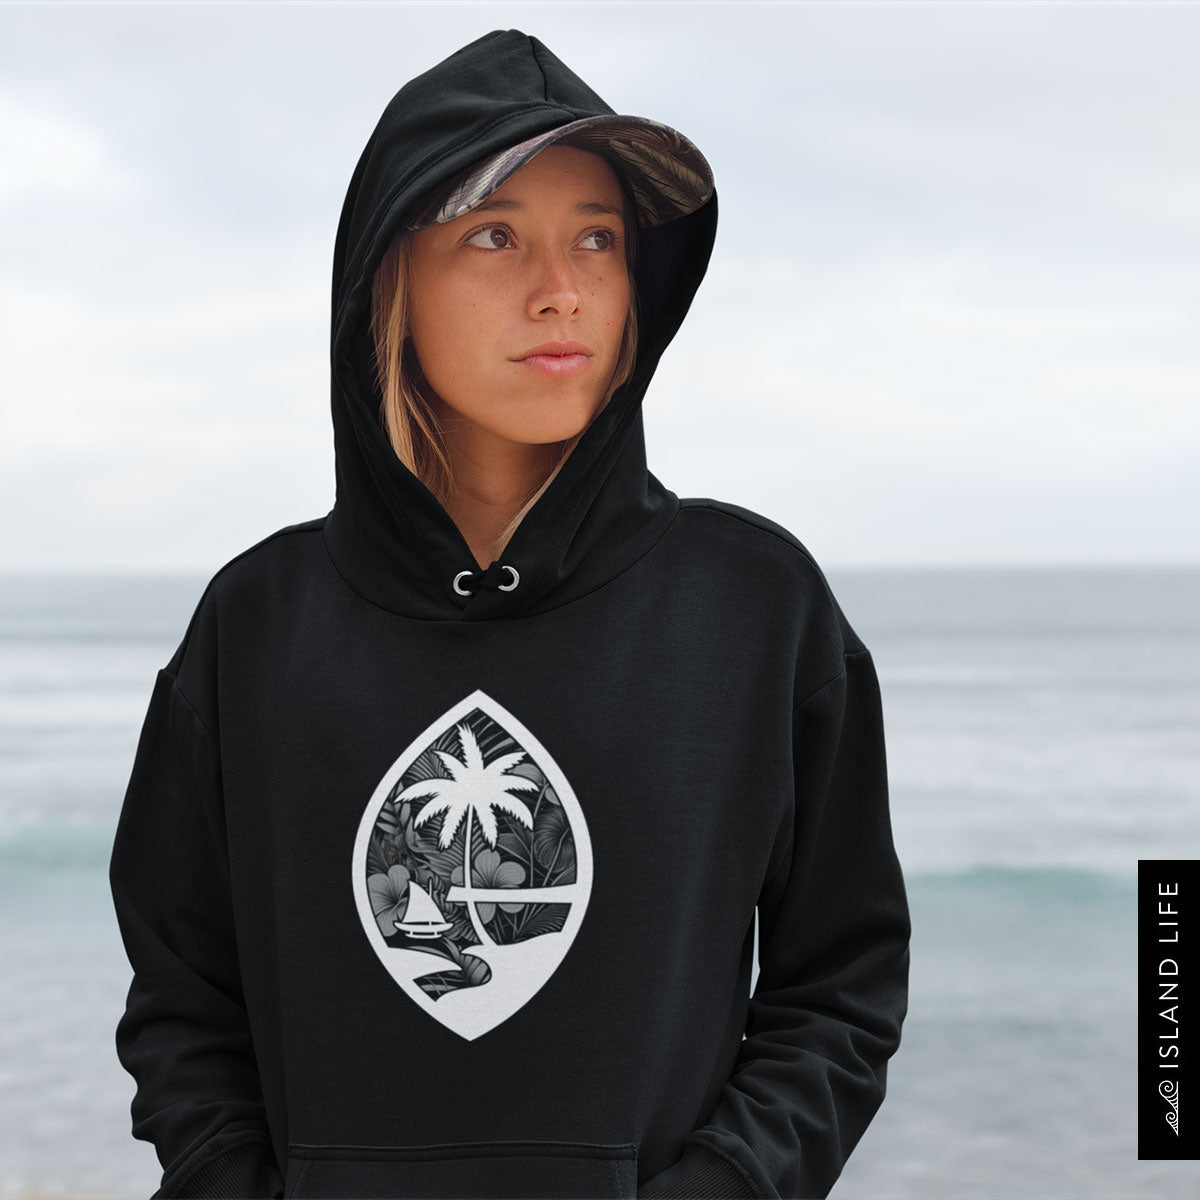 Guam Seal Monochrome Floral Adult Heavy Blend Pullover Hoodie